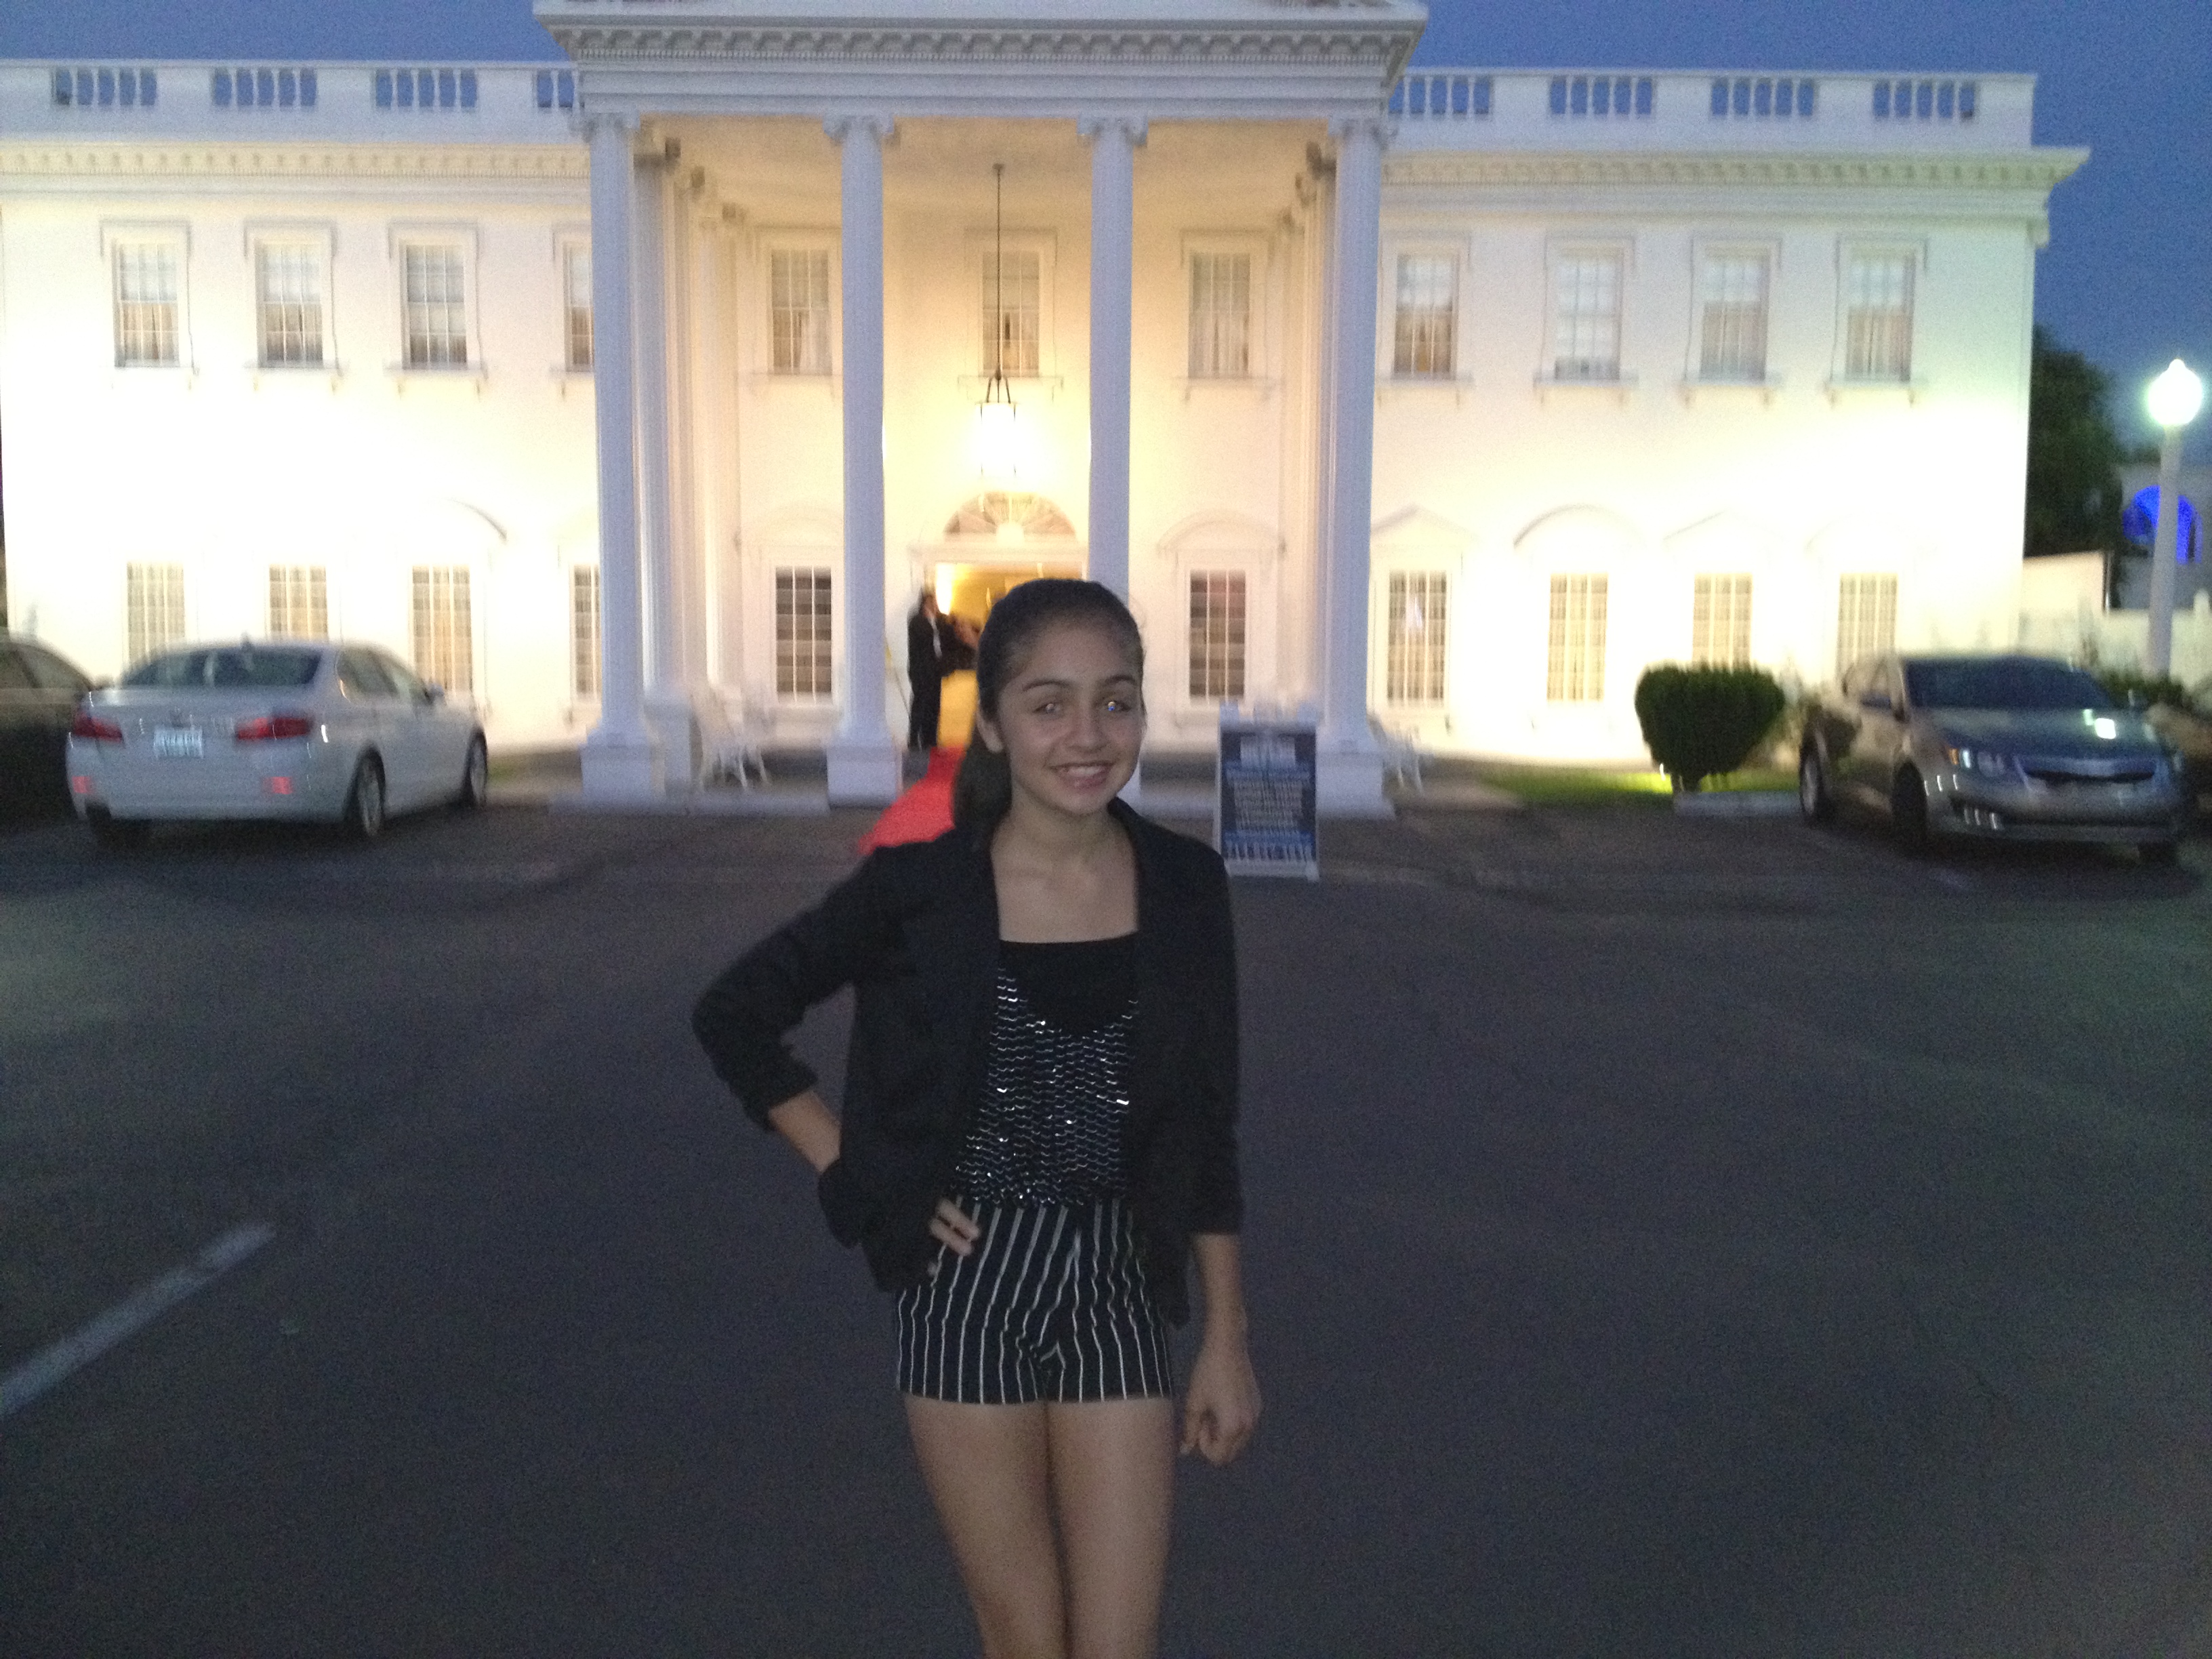 Samantha sang at The White House in Fullerton, CA for an elite crowd.